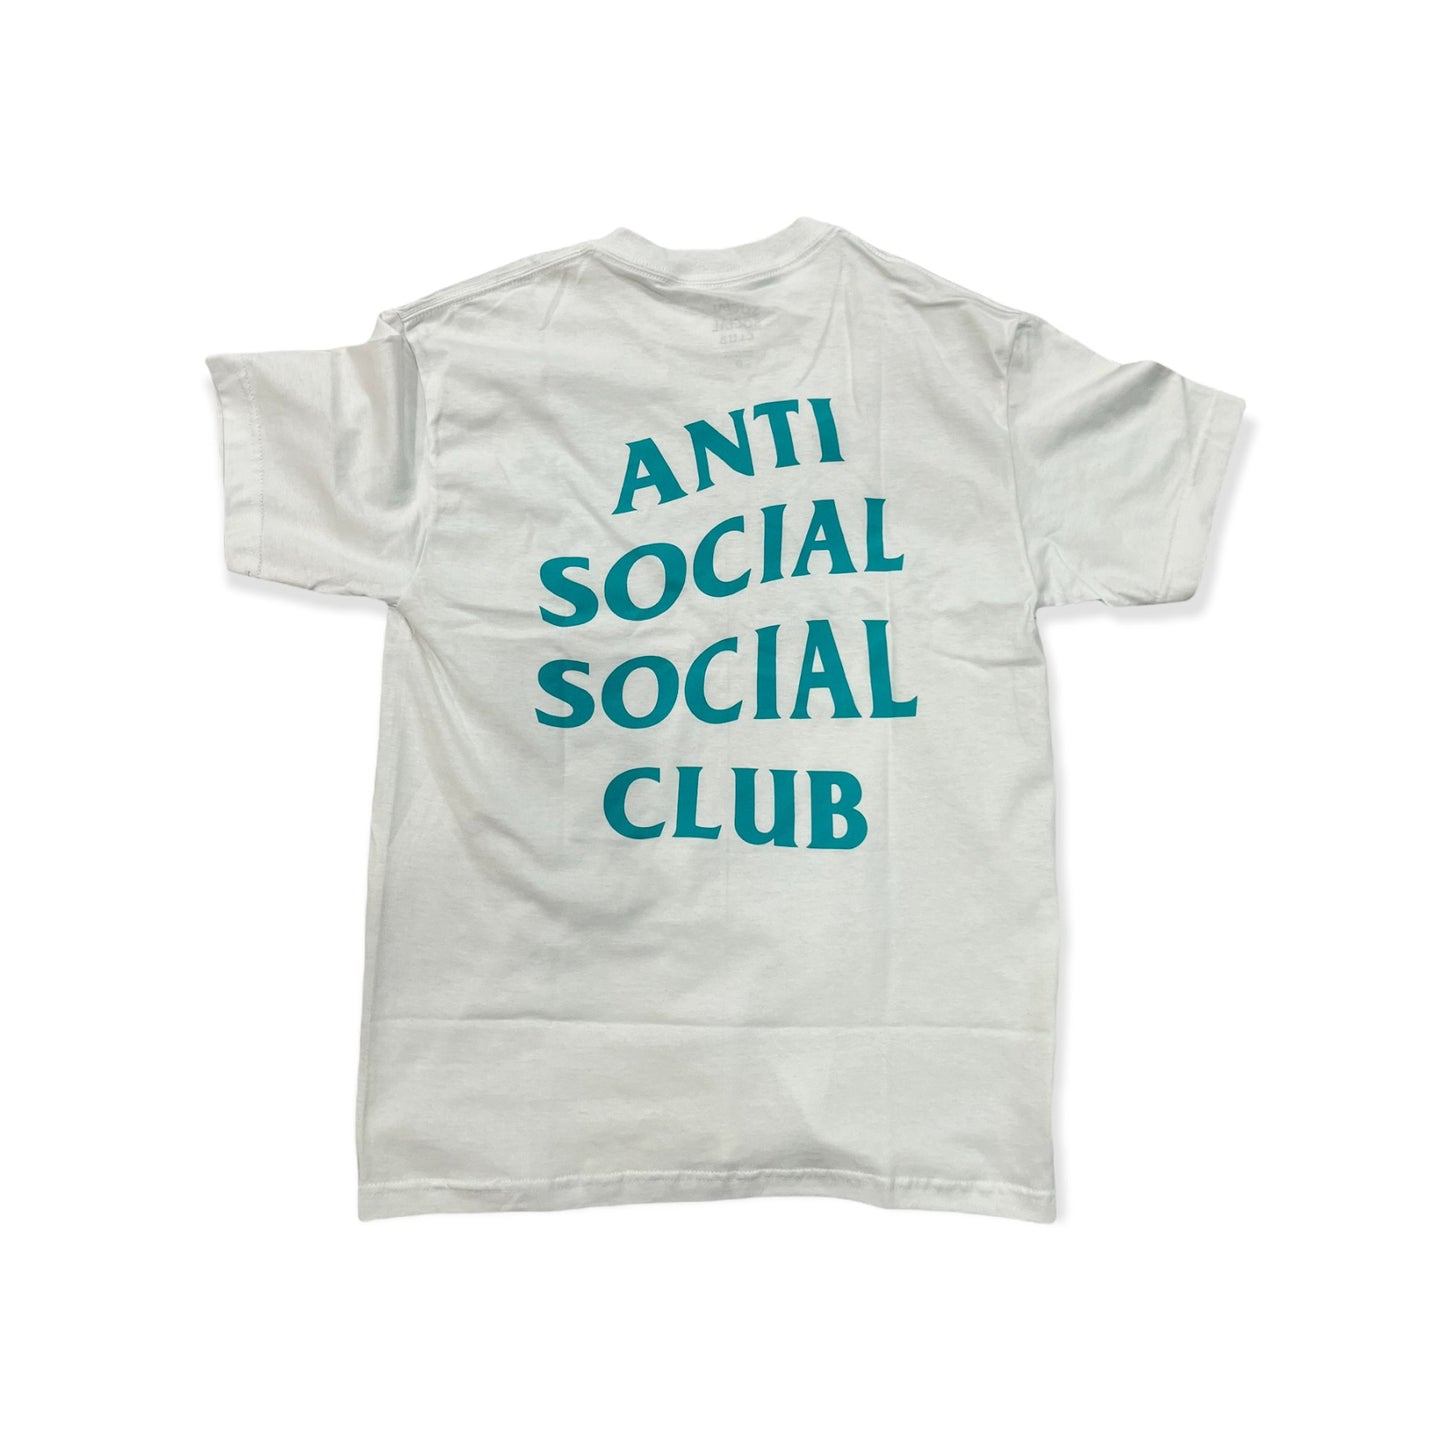 Boots à Lacet Daix Gris Logo Tee White / Teal - Sneakersbe Sneakers Sale Online